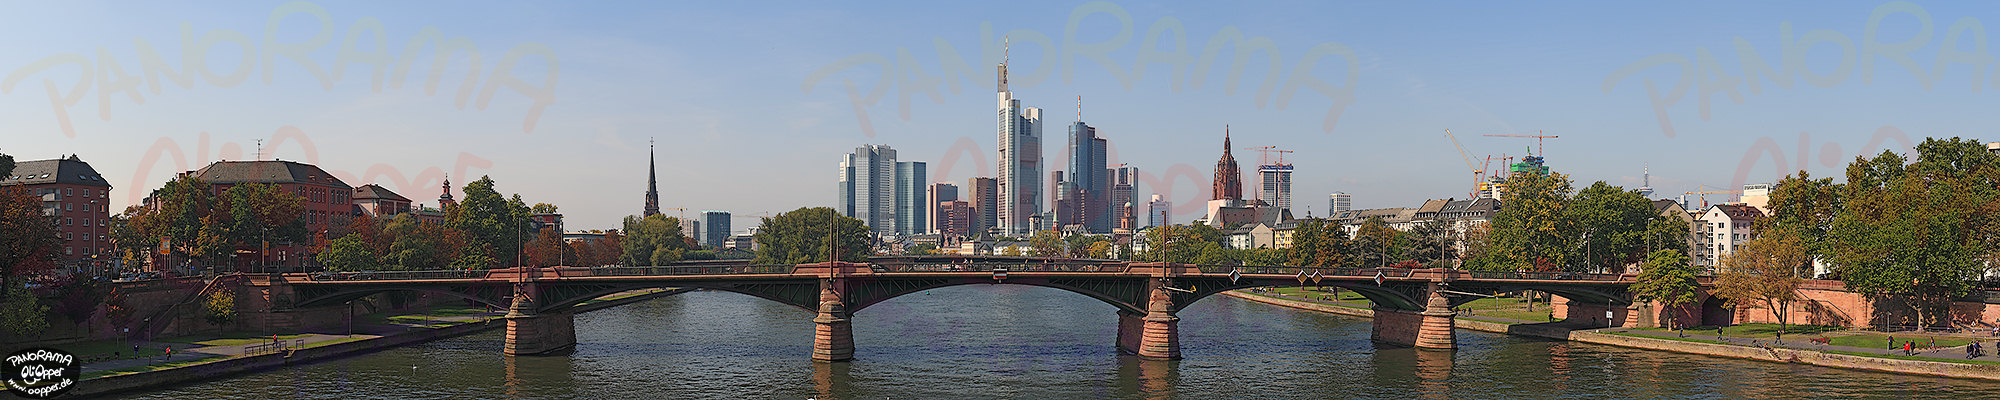 Panorama Frankfurt - Skyline am Tag - p308 - (c) by Oliver Opper